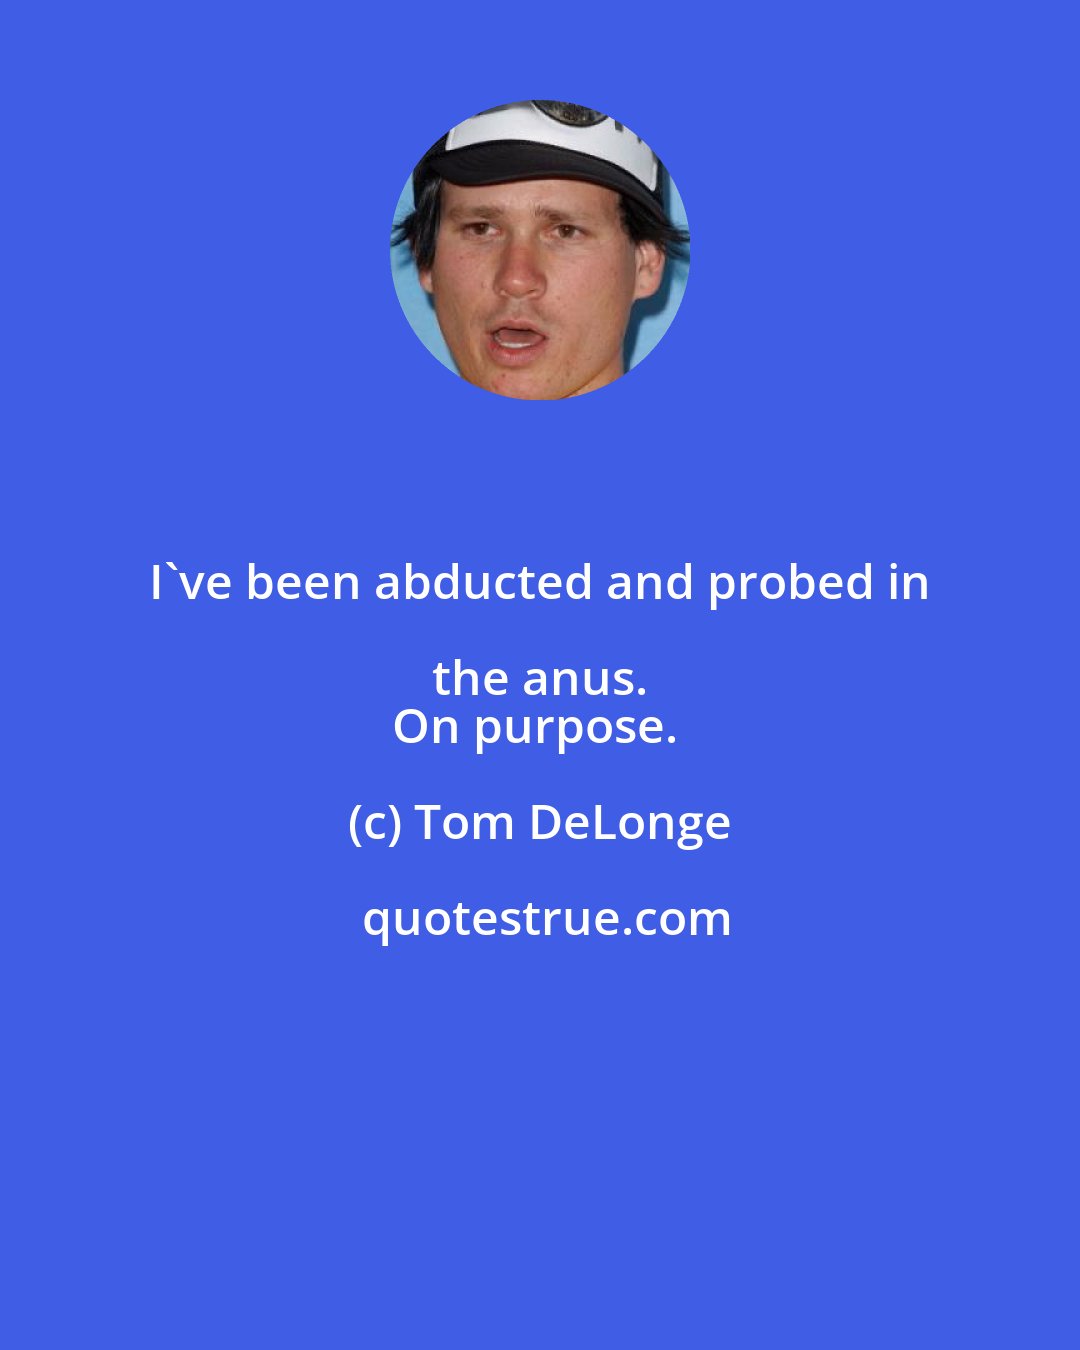 Tom DeLonge: I've been abducted and probed in the anus. 
On purpose.